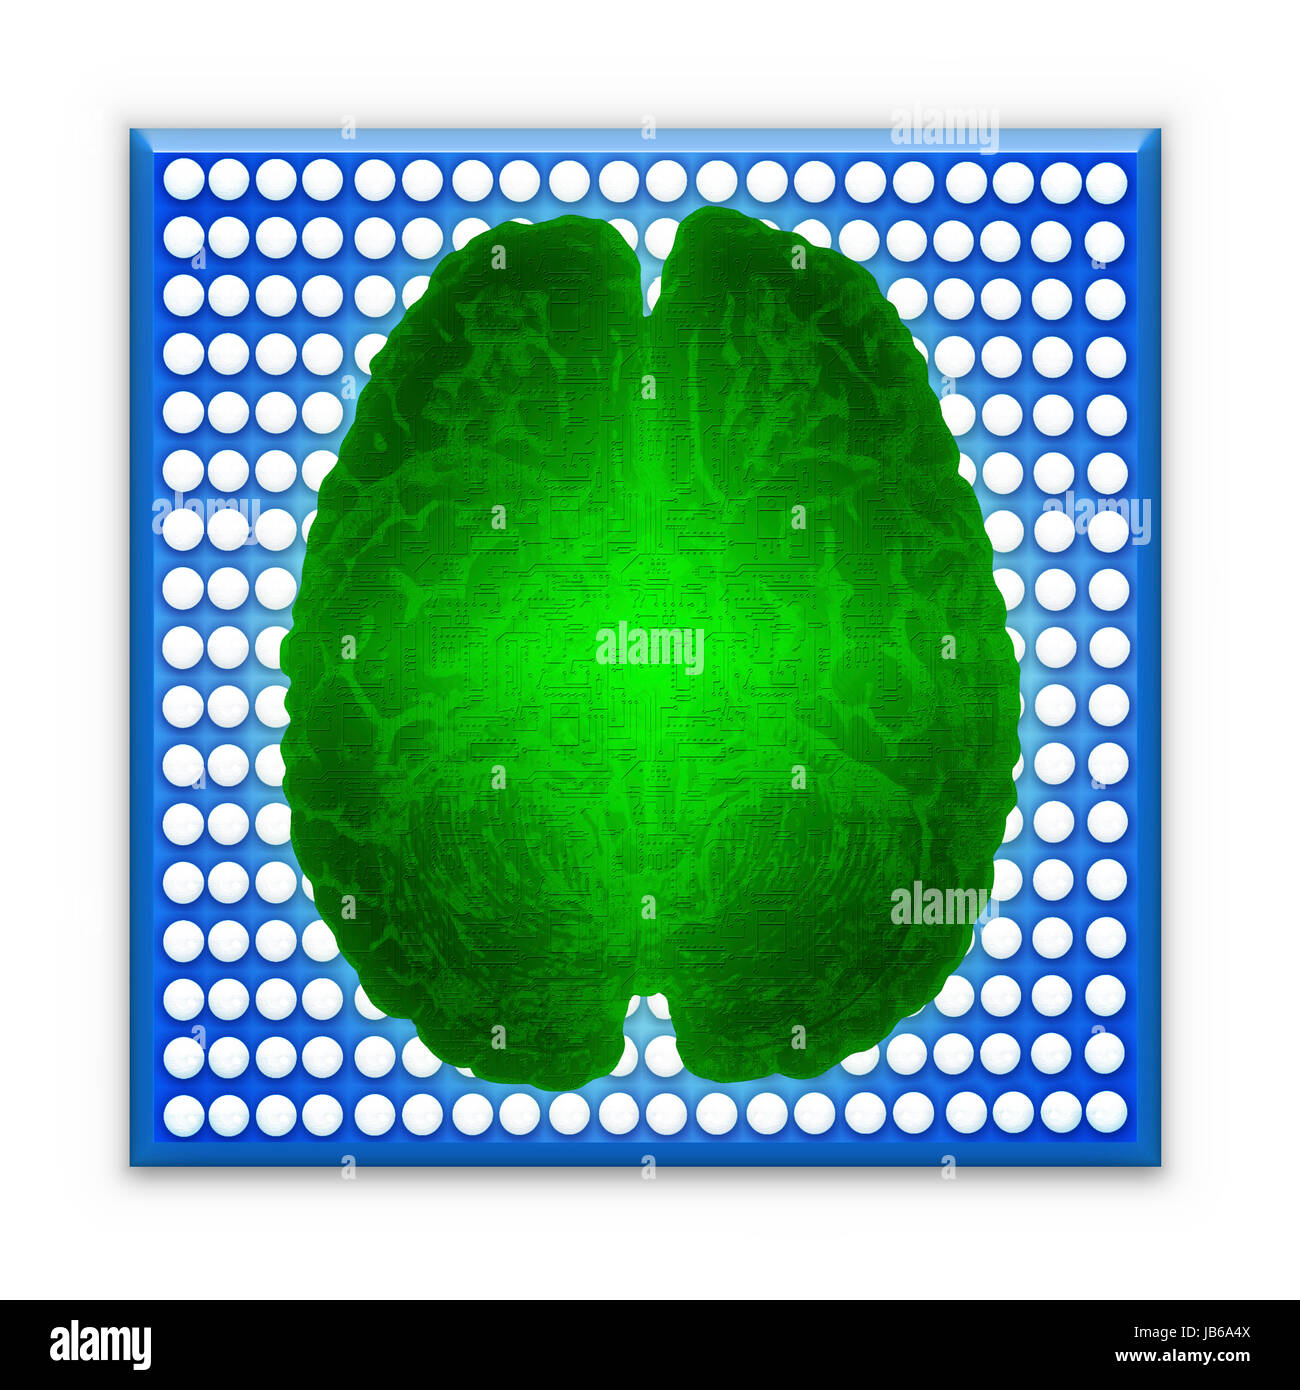 Artificial intelligence (AI) and High Tech Concept. Green glowing brain over blue microchip isolated on white background. Stock Photo